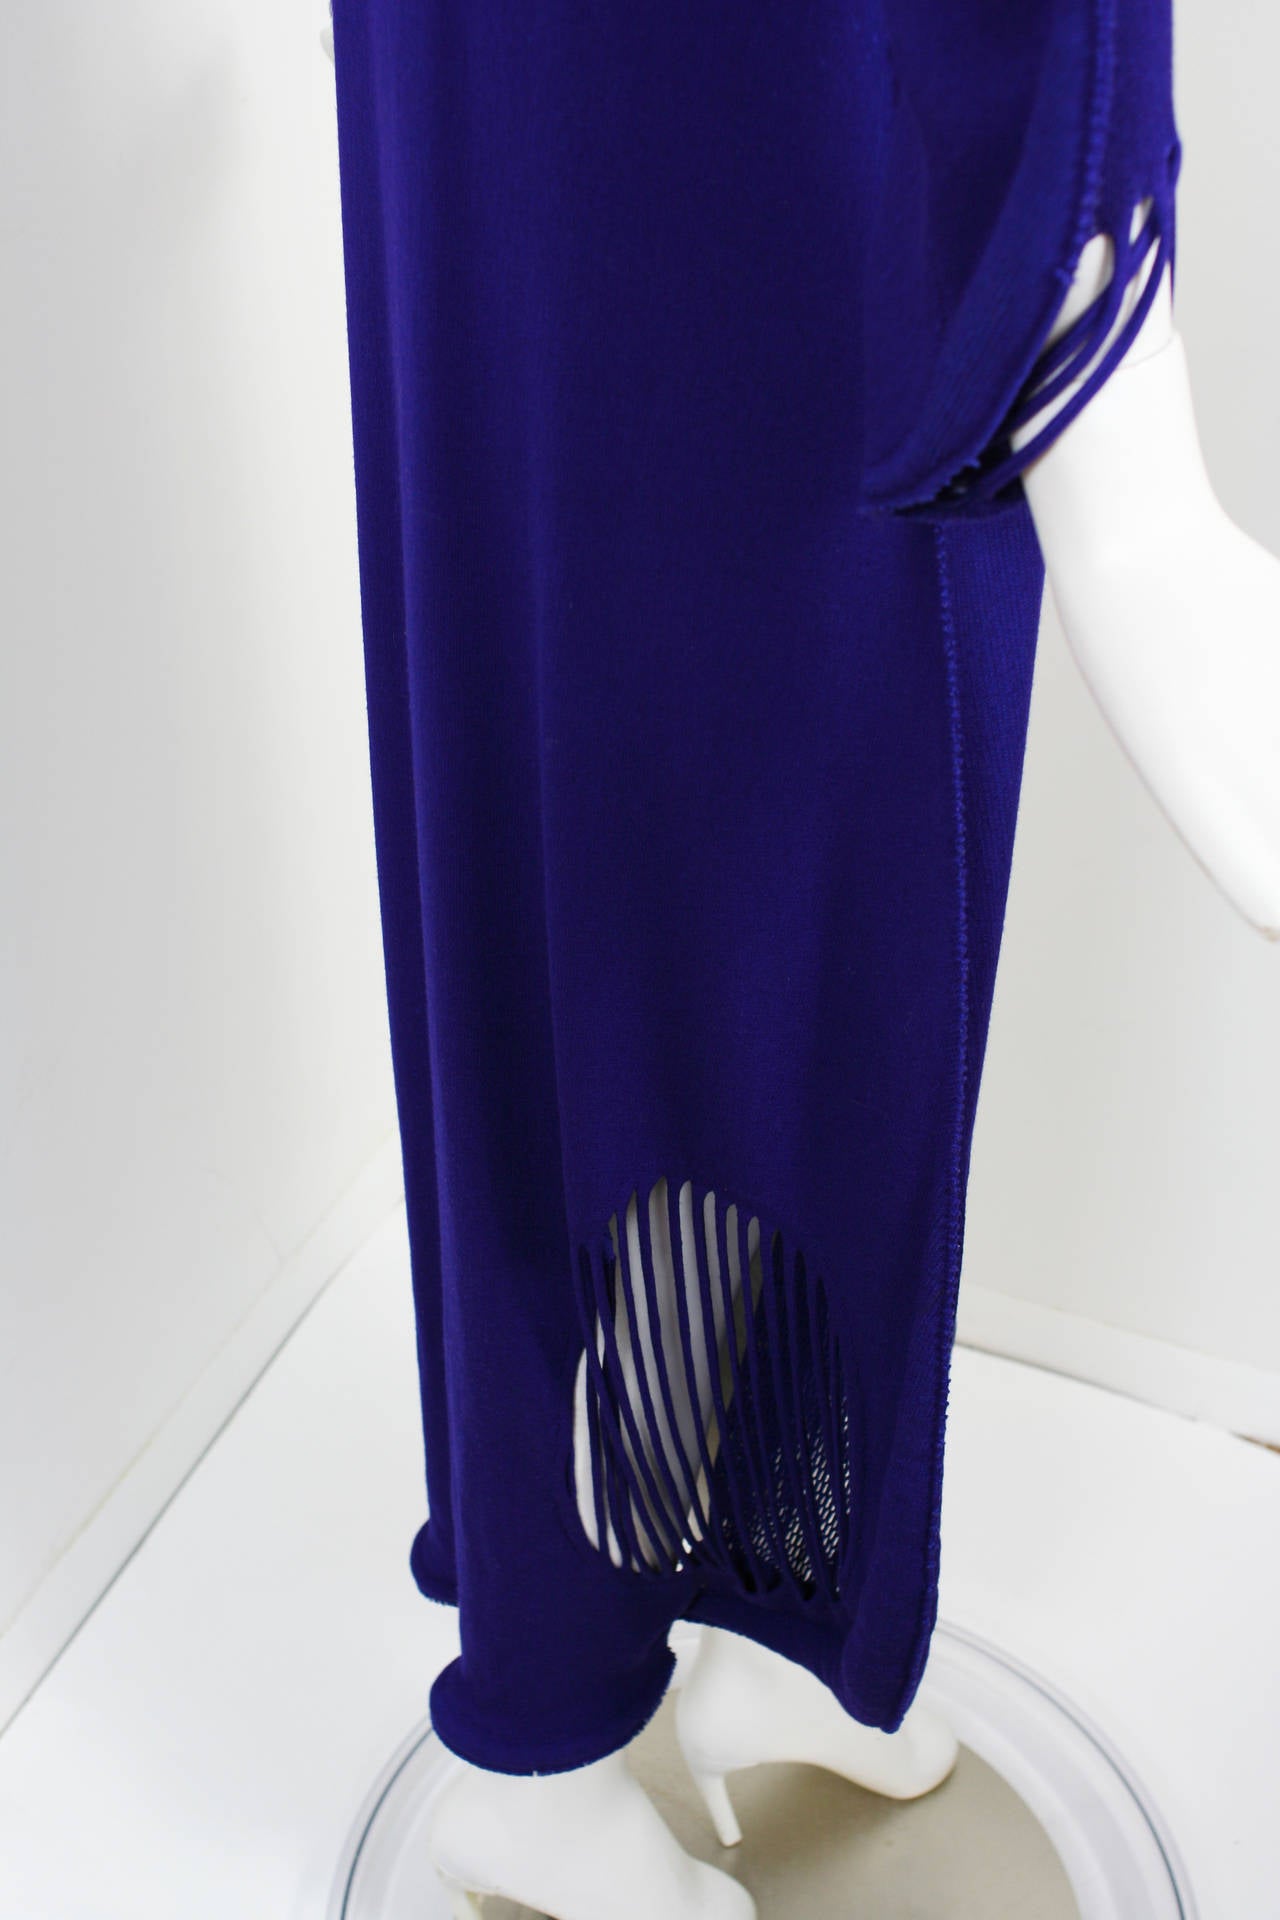 Rare Collectors A-POC Issey Miyake Purple Avant Garde Maxi Dress For Sale 1